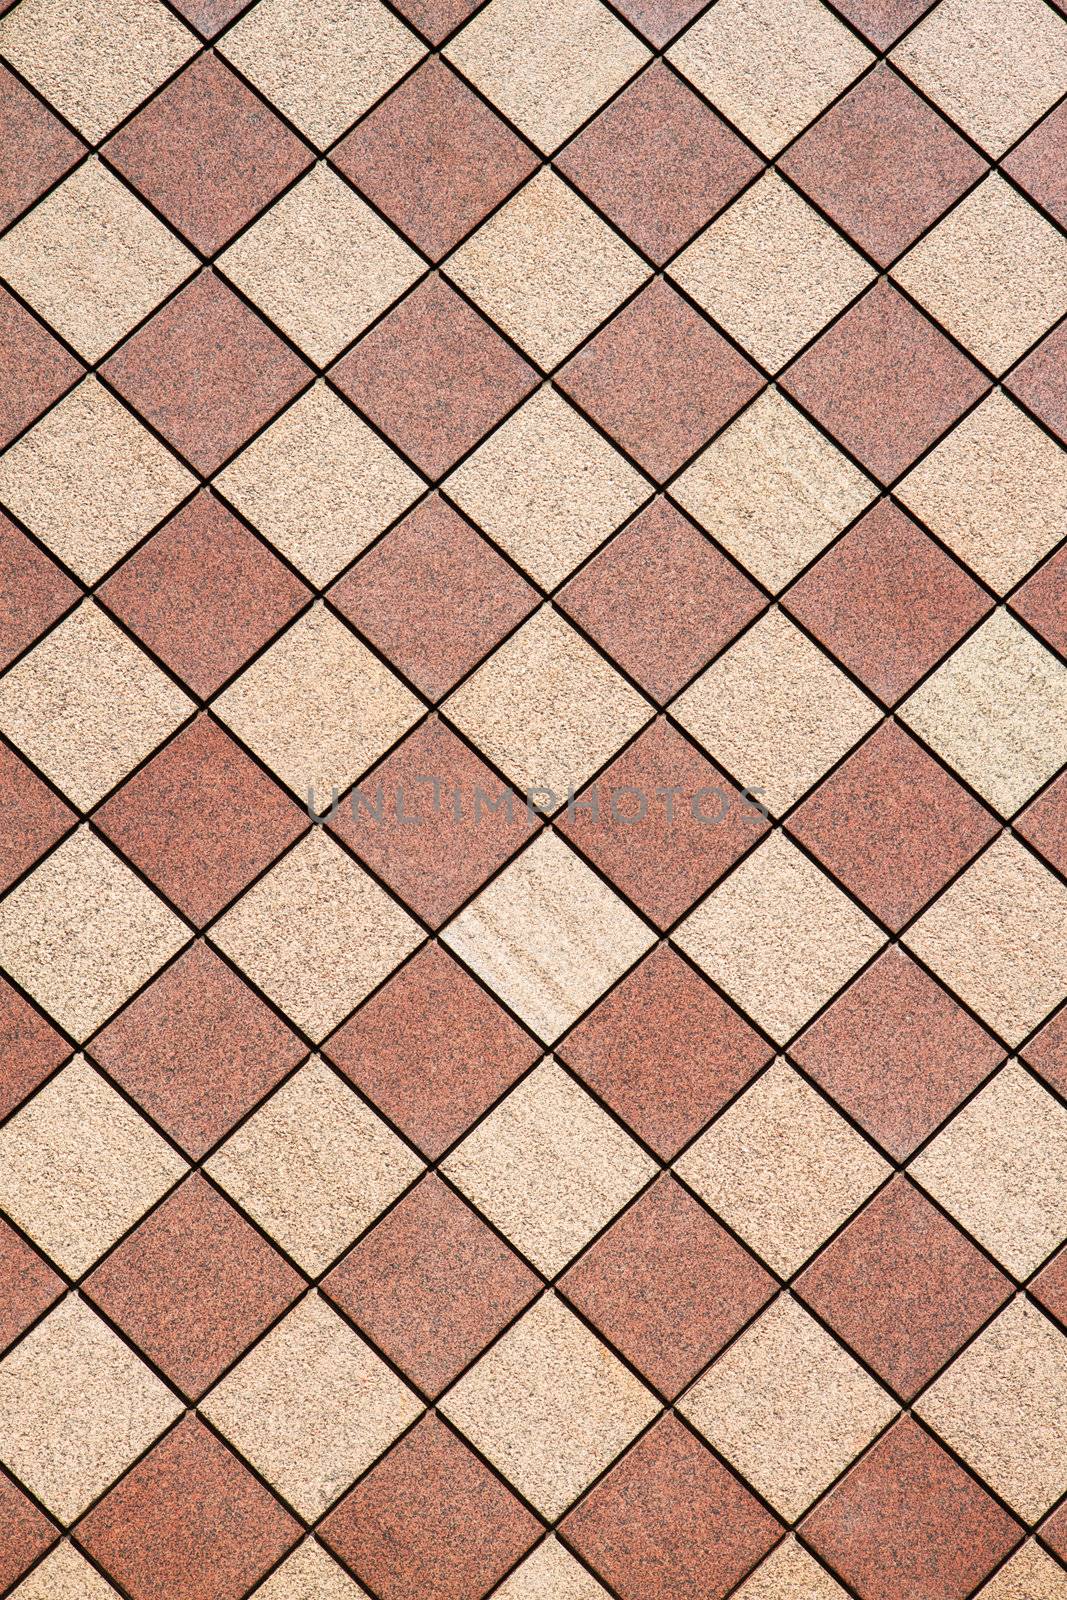 Brown and tan checkered wall in a vertical image